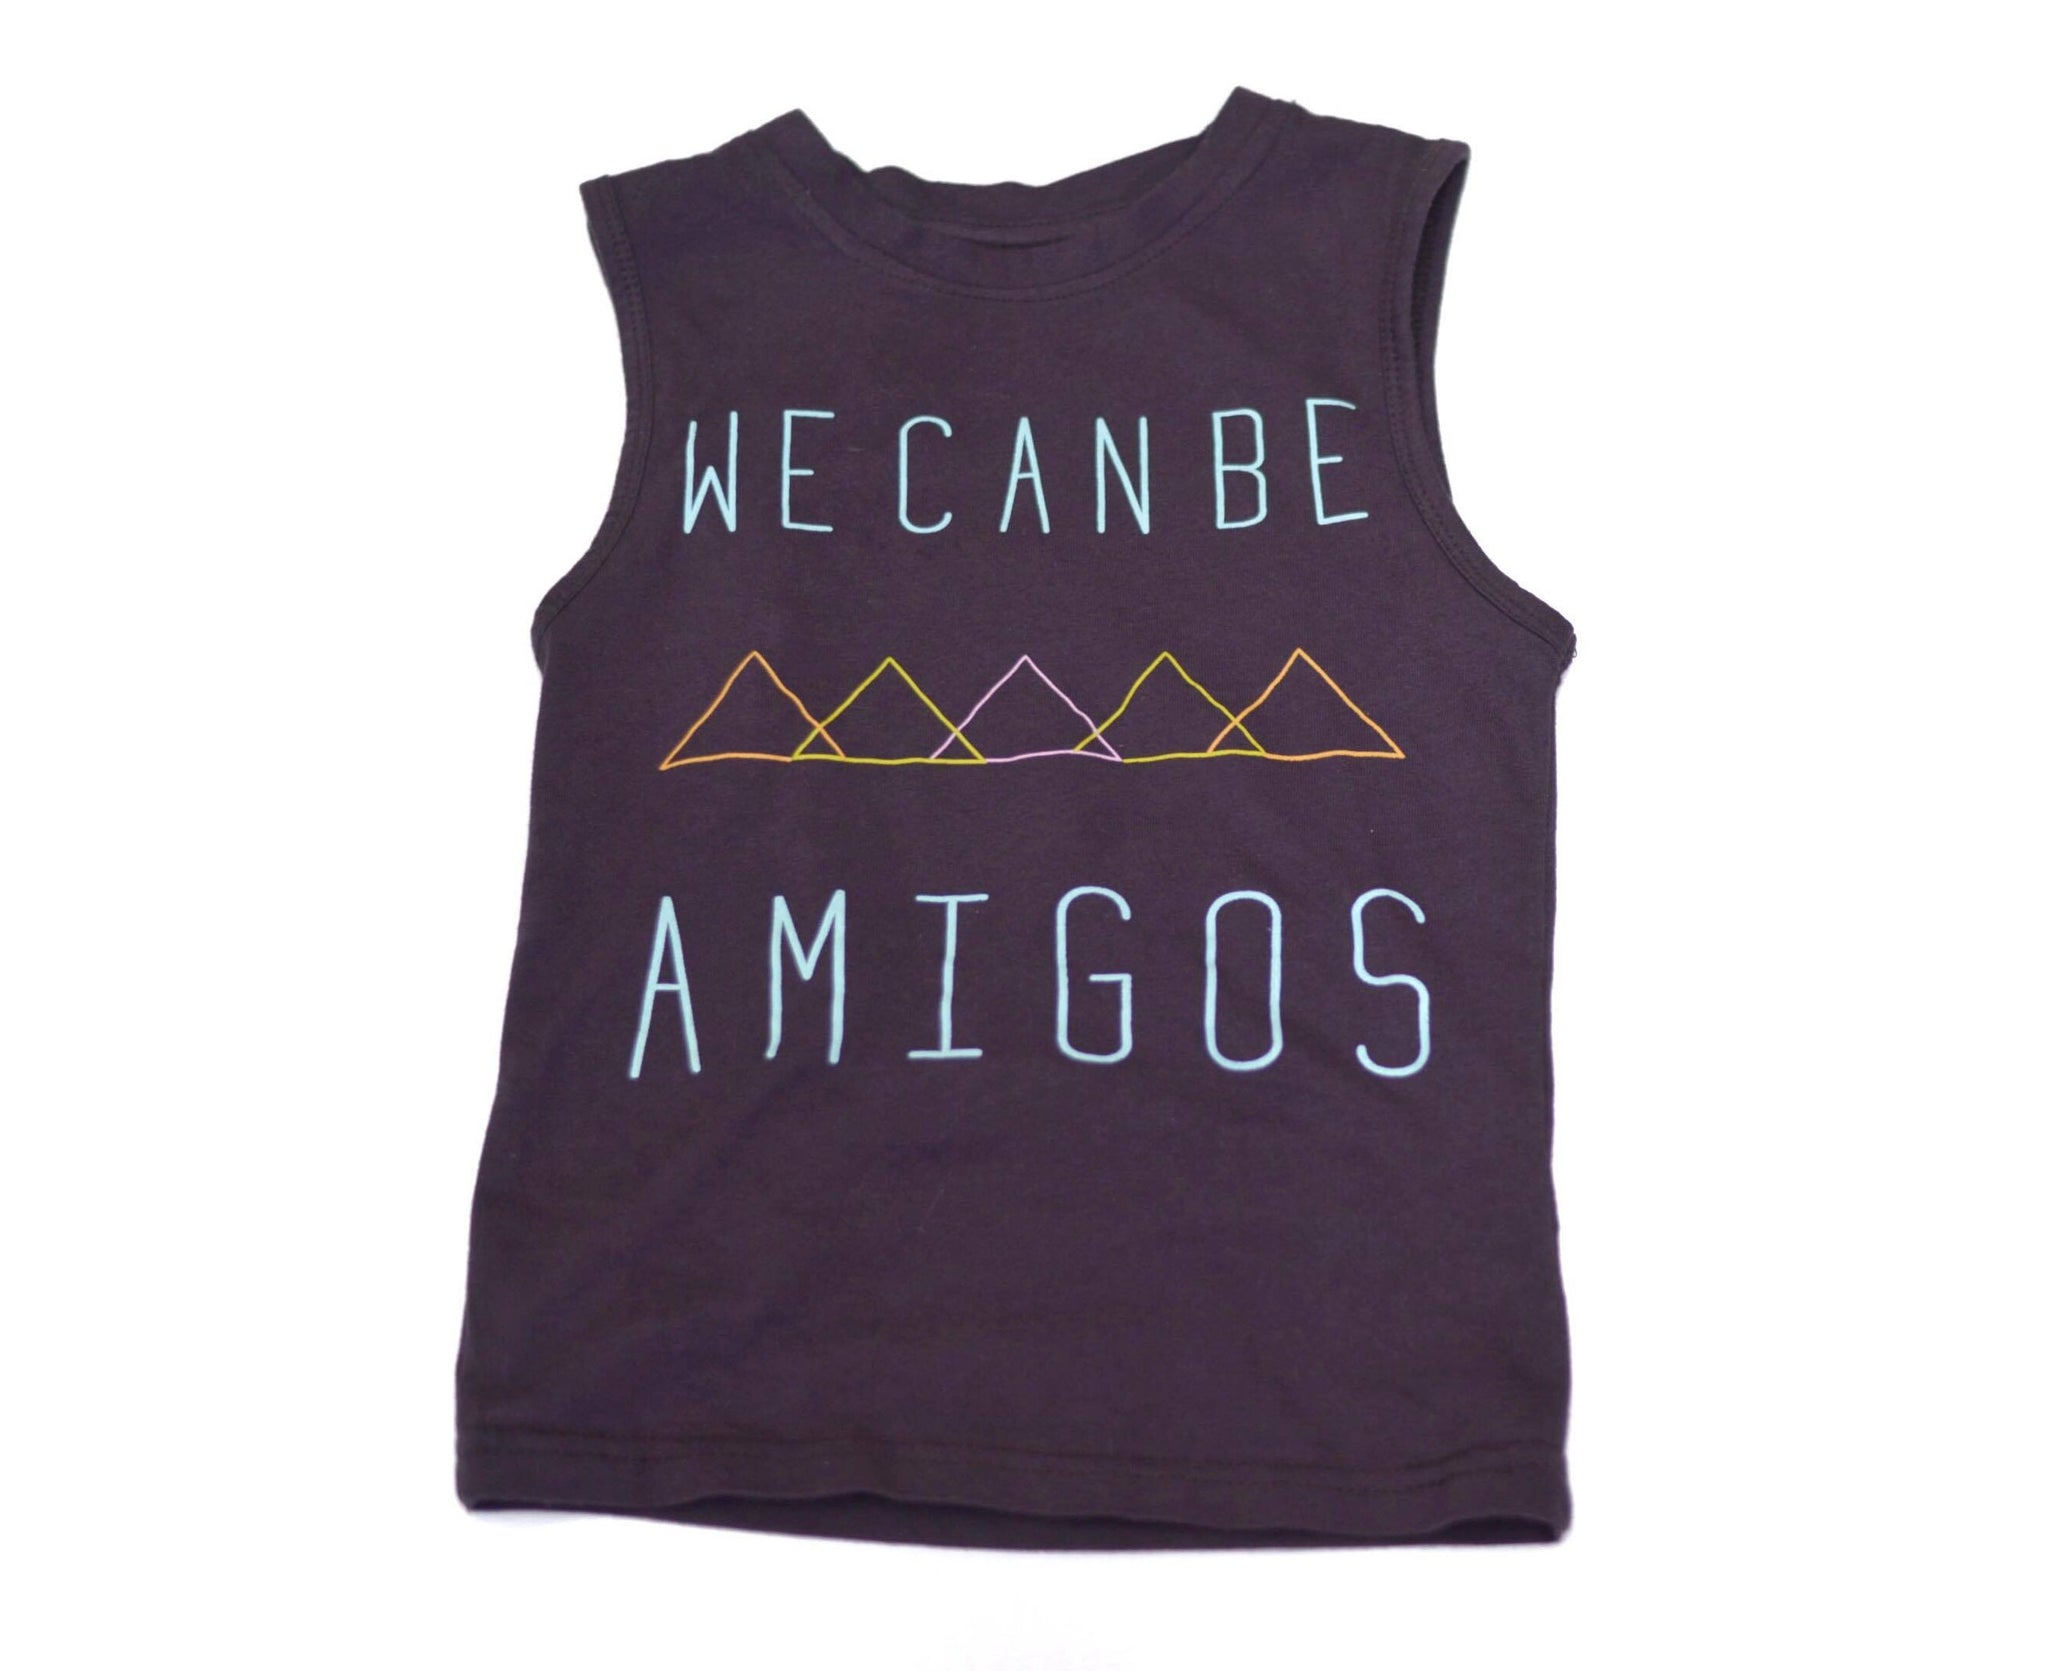 Norte Amigo Tank Top, make a statement in this organic cotton tee with a message of kindness